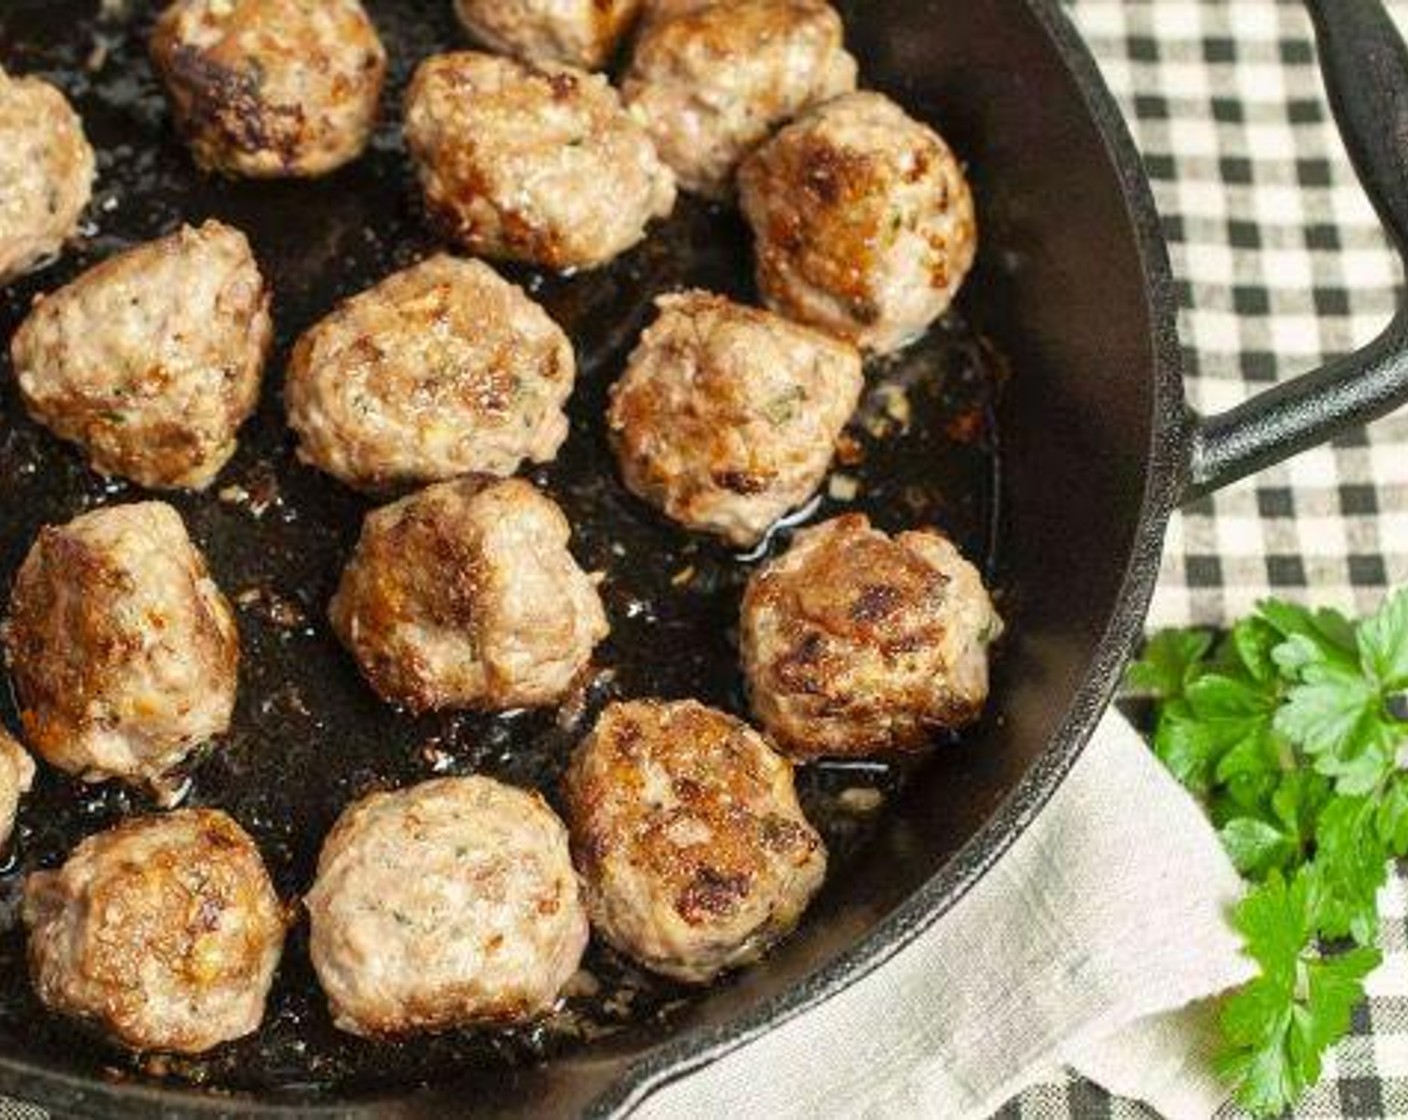 step 3 Heat Canola Oil (1 Tbsp) in a cast iron or oven-safe skillet over medium heat until hot. Arrange meatballs in a single layer and brown on all sides, about 20 minutes. Remove meatballs to a paper towel-lined plate and drain all but 1 tablespoon of fat from the skillet.